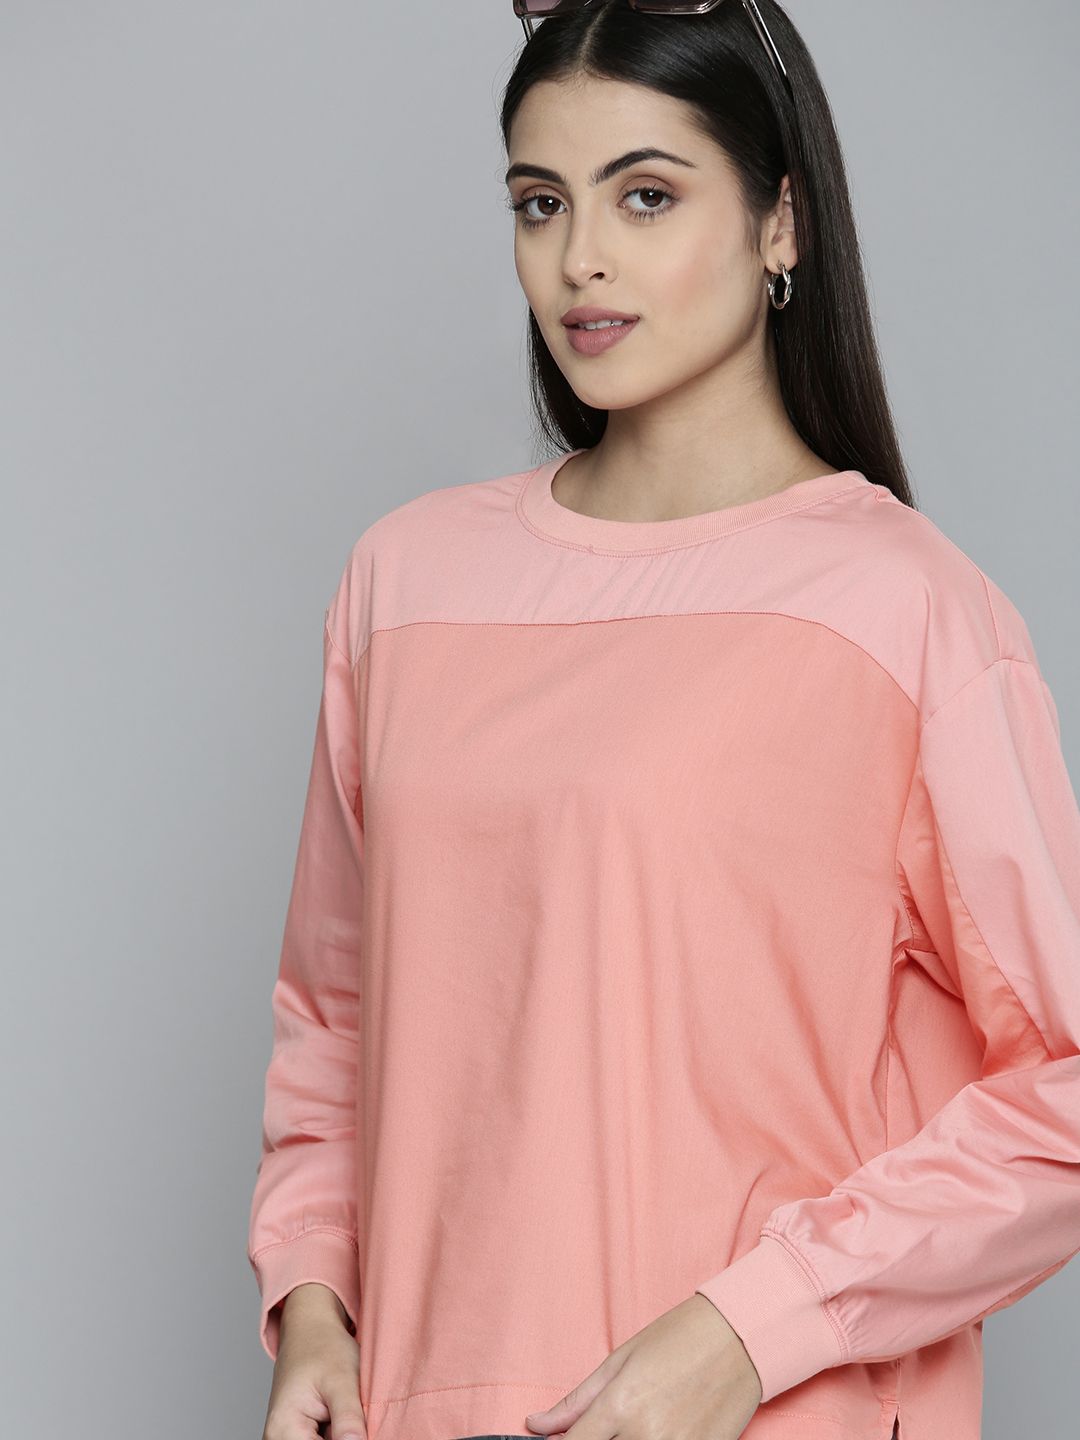 Levis Women Colourblocked Extended Sleeves Regular Top Price in India